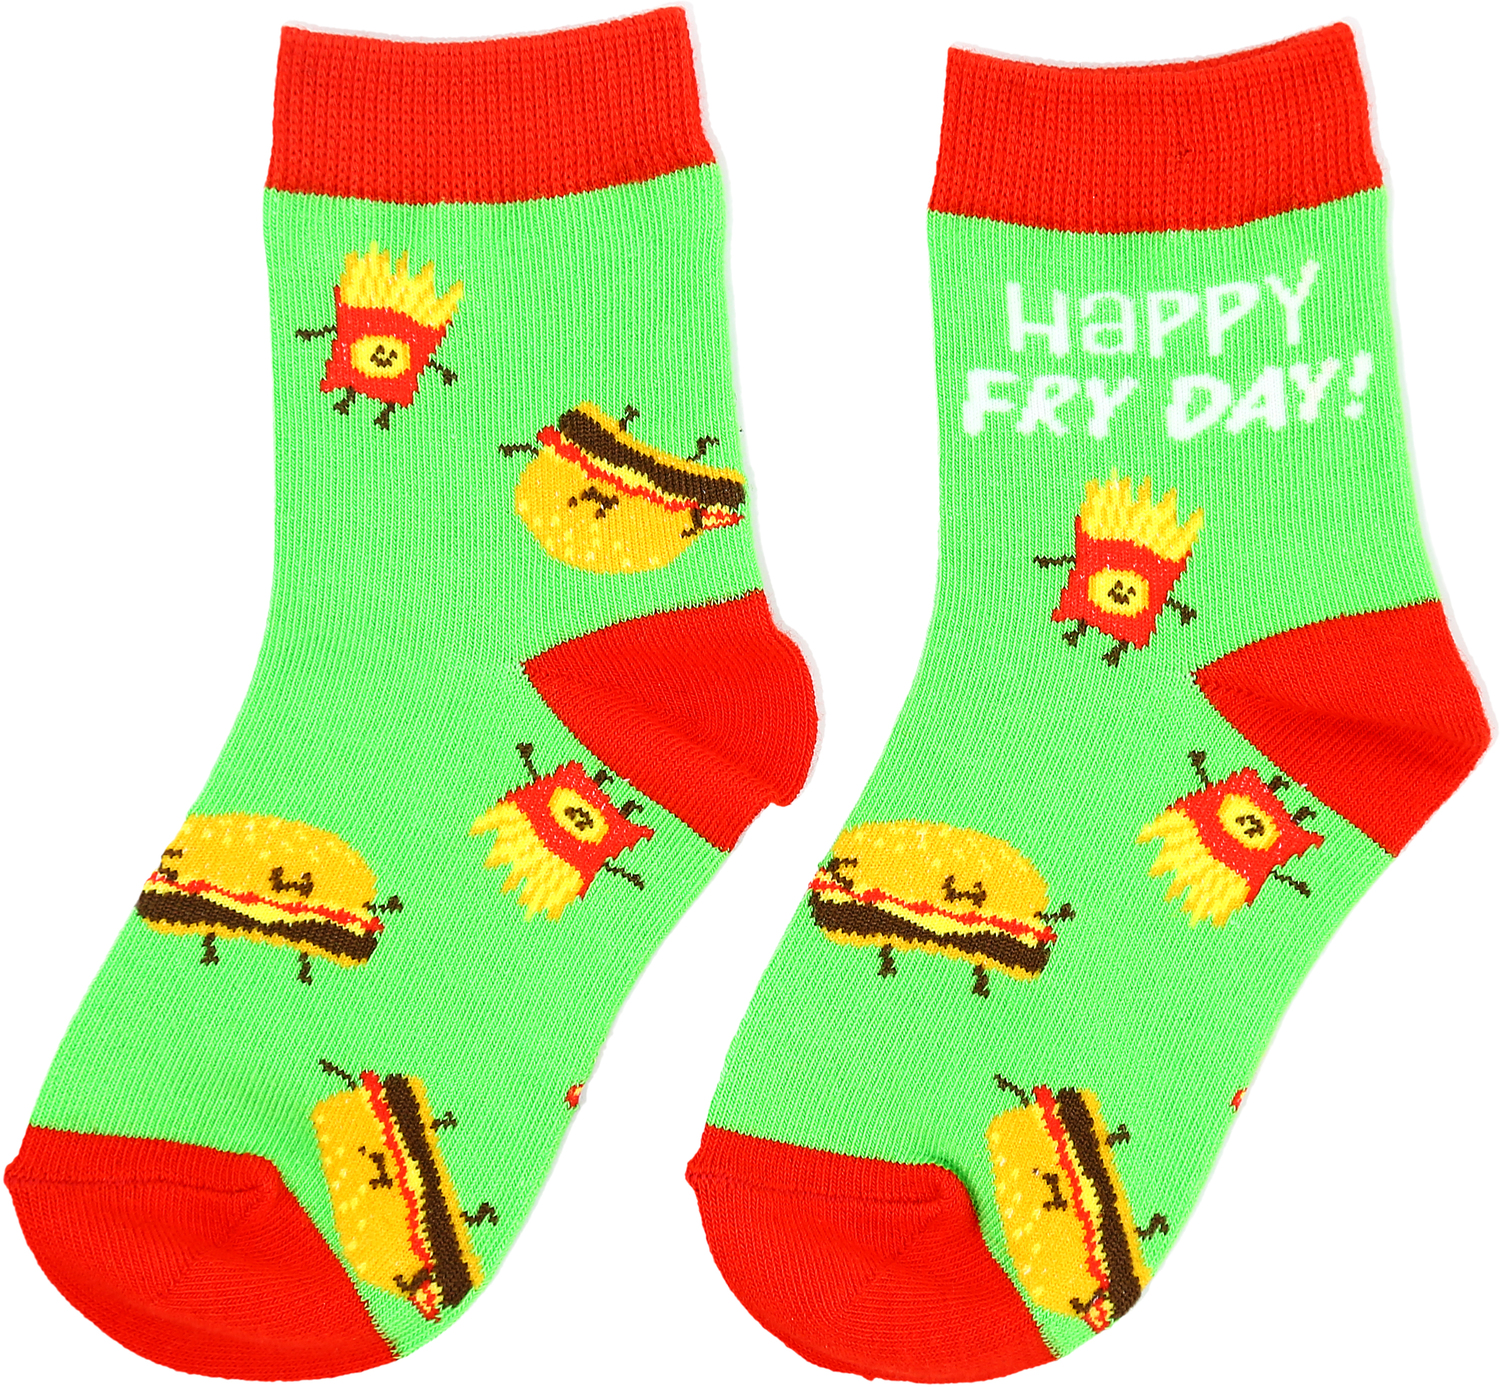 Burger and Fries by Late Night Snacks - Burger and Fries - S/M Youth Cotton Blend Crew Socks